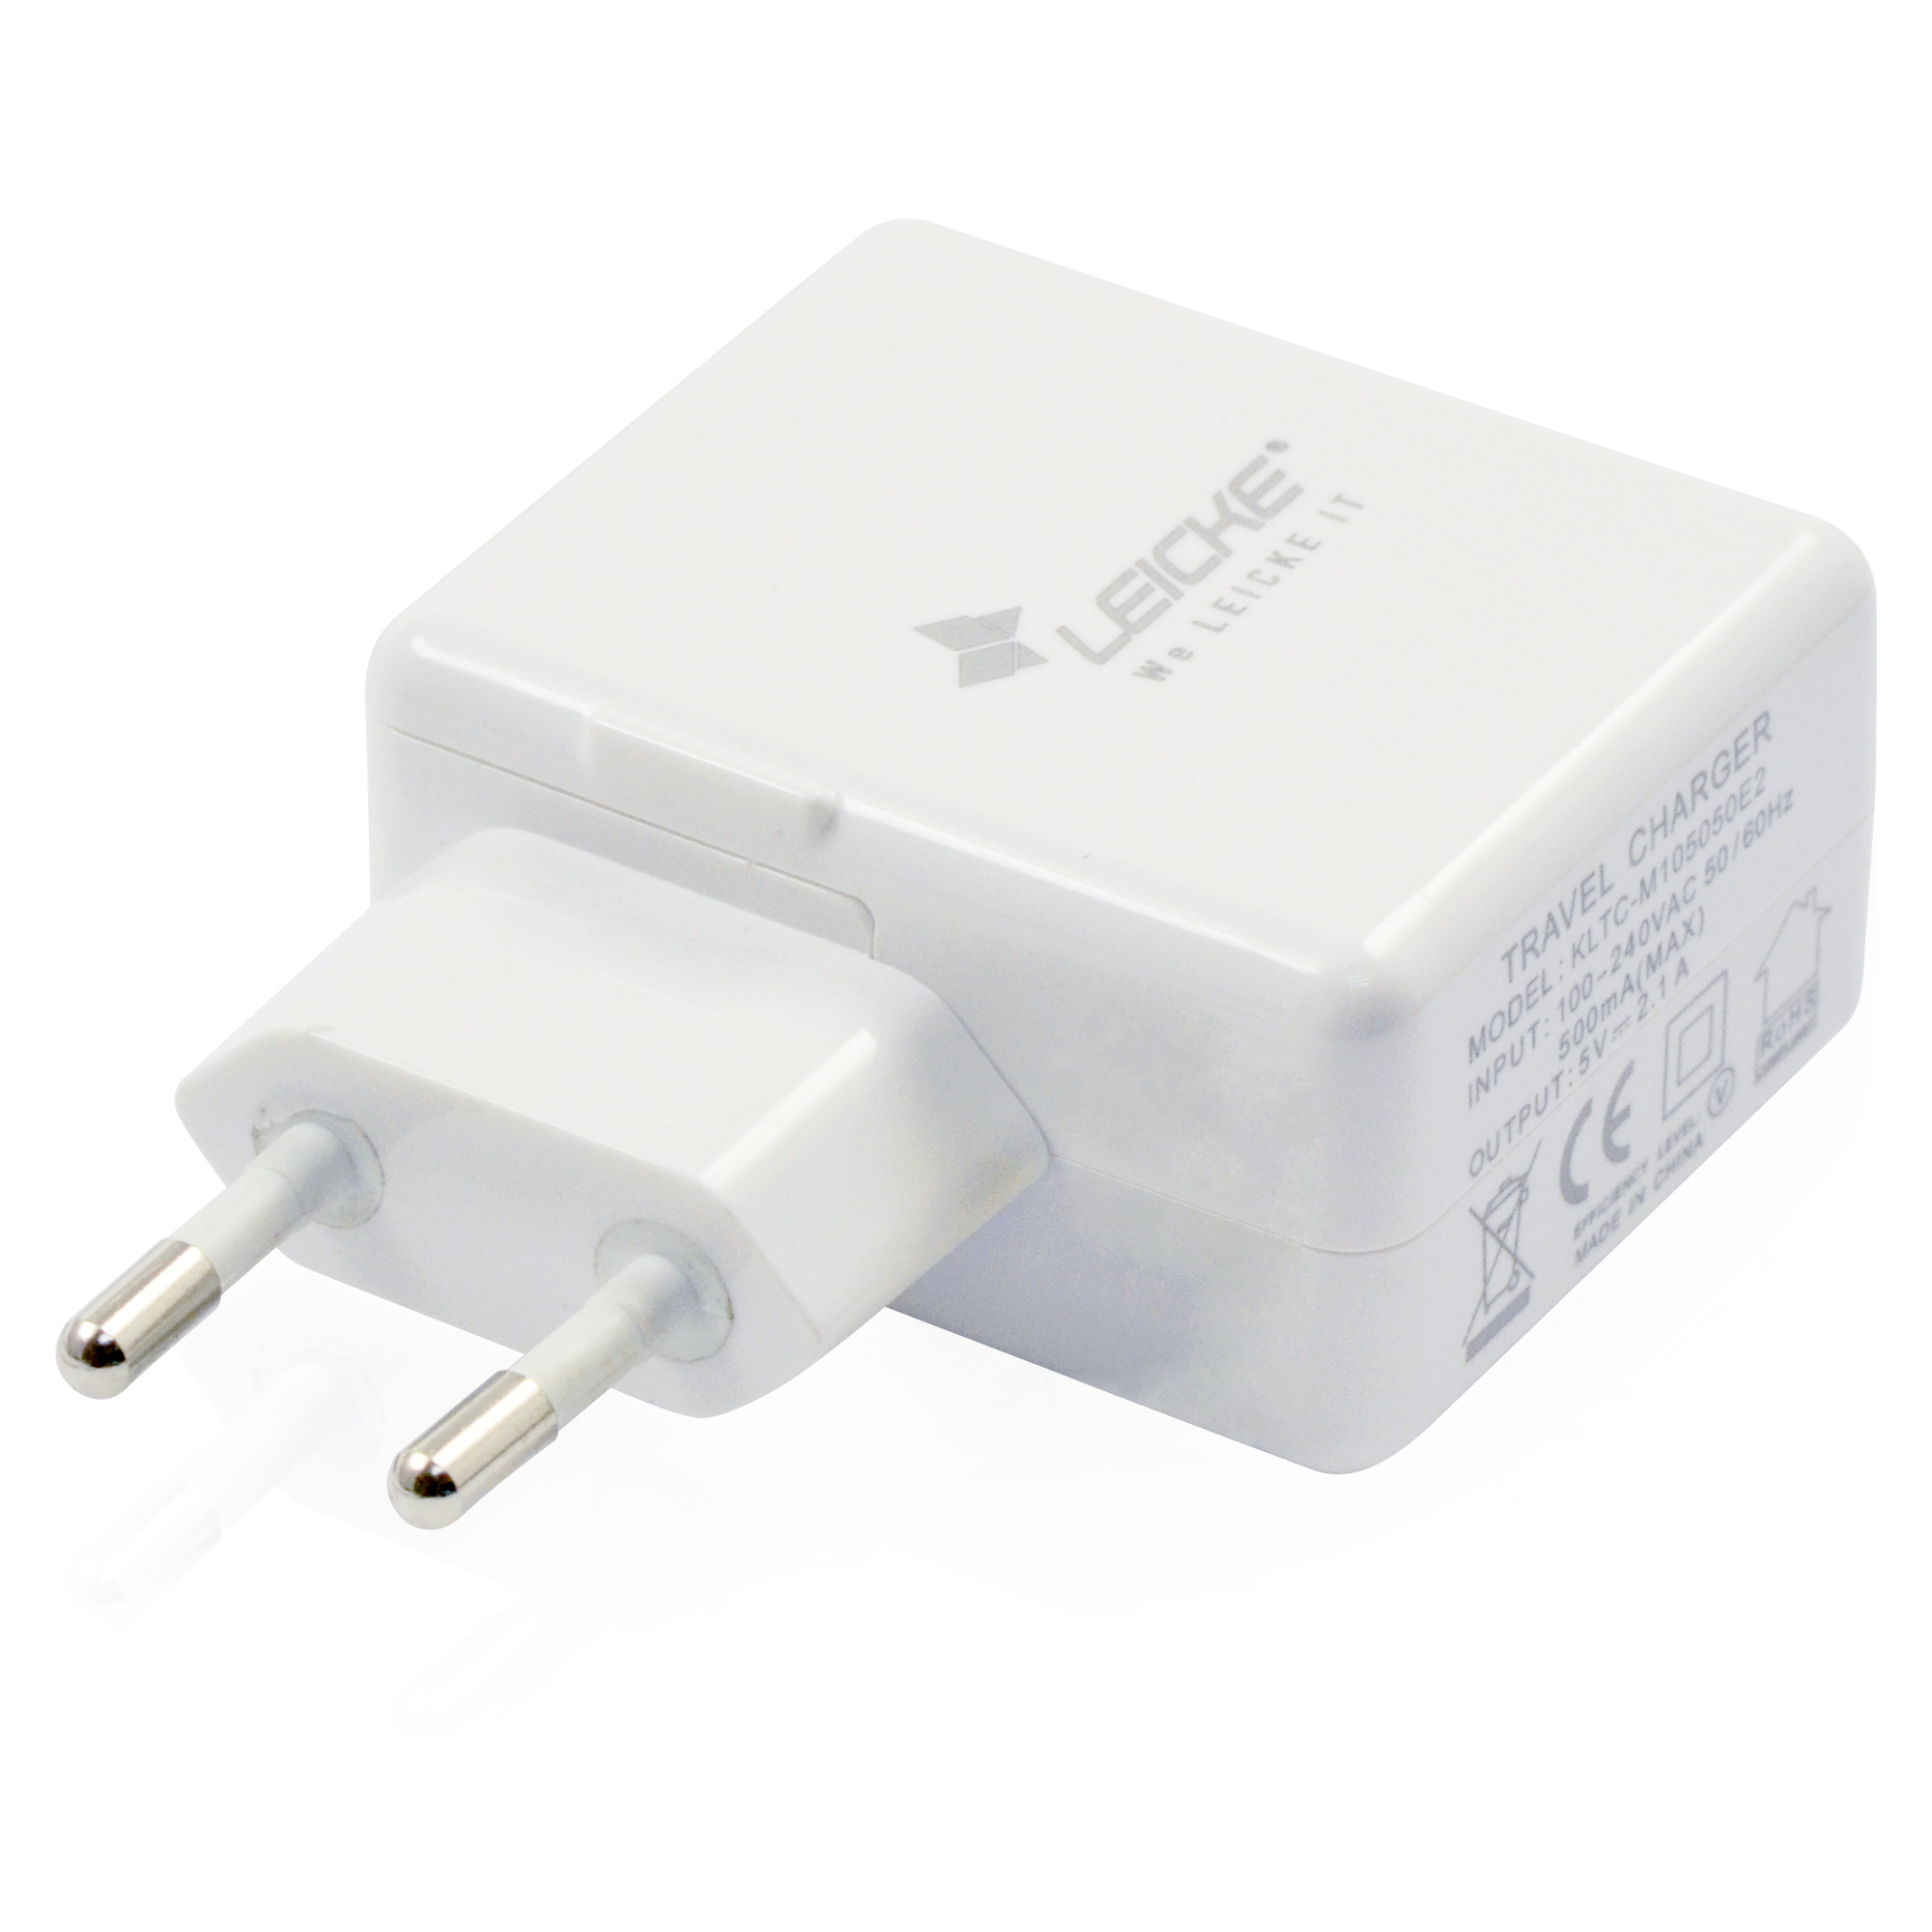 Chargeur secteur WE 2 Ports USB-A Chargeur Mural (5V/2.1A Max).